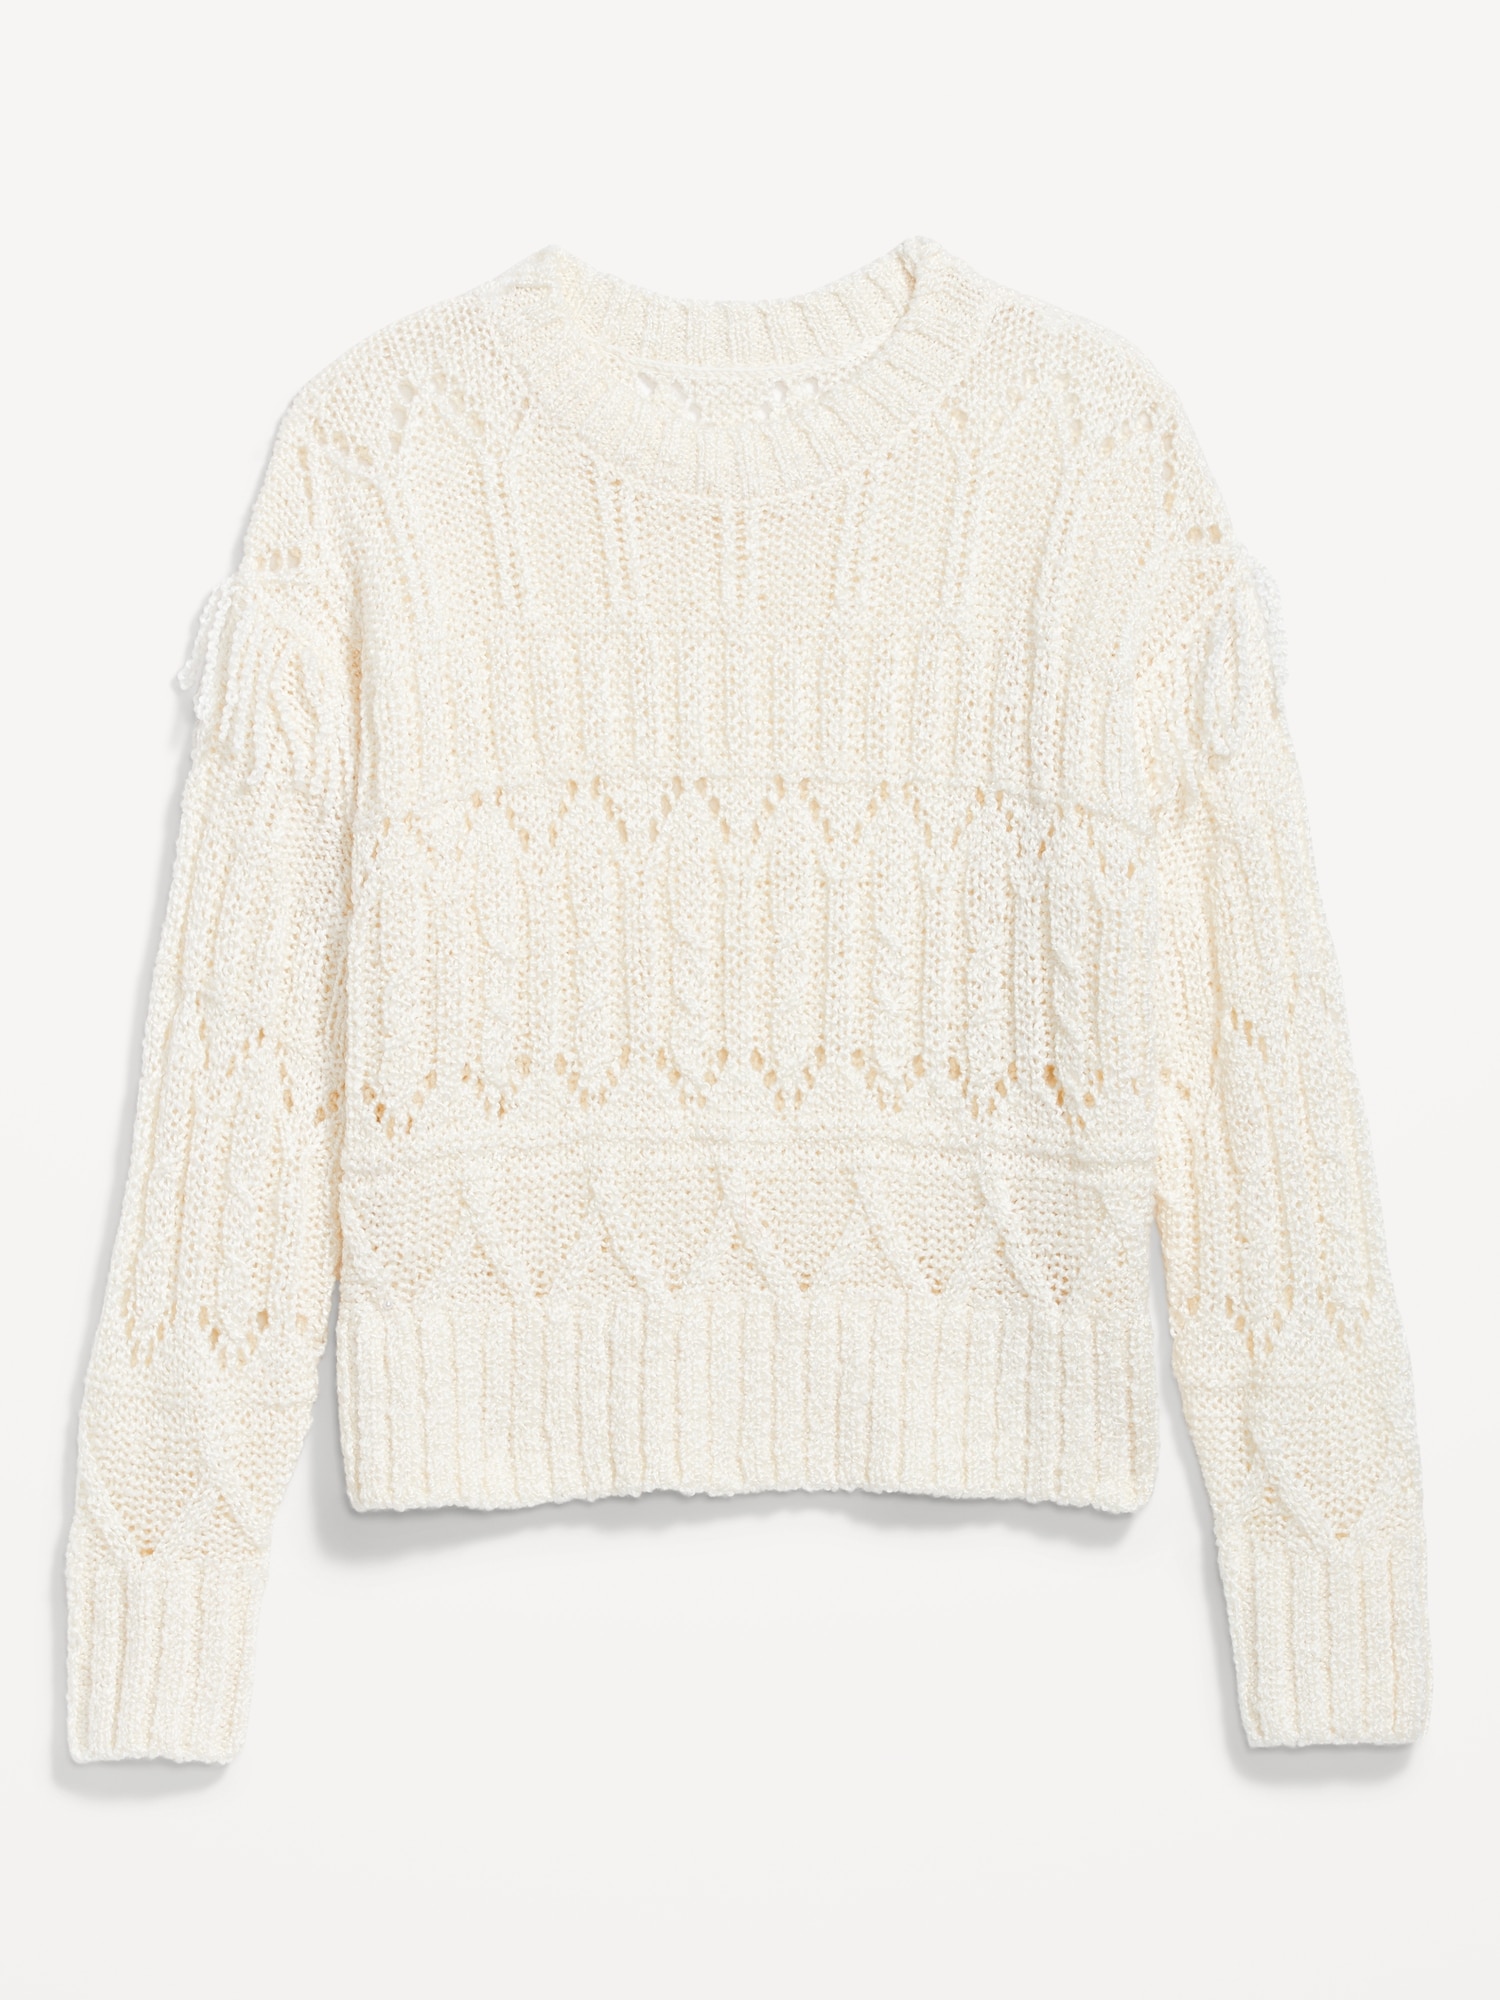 Textured Fringe Pullover Sweater | Old Navy